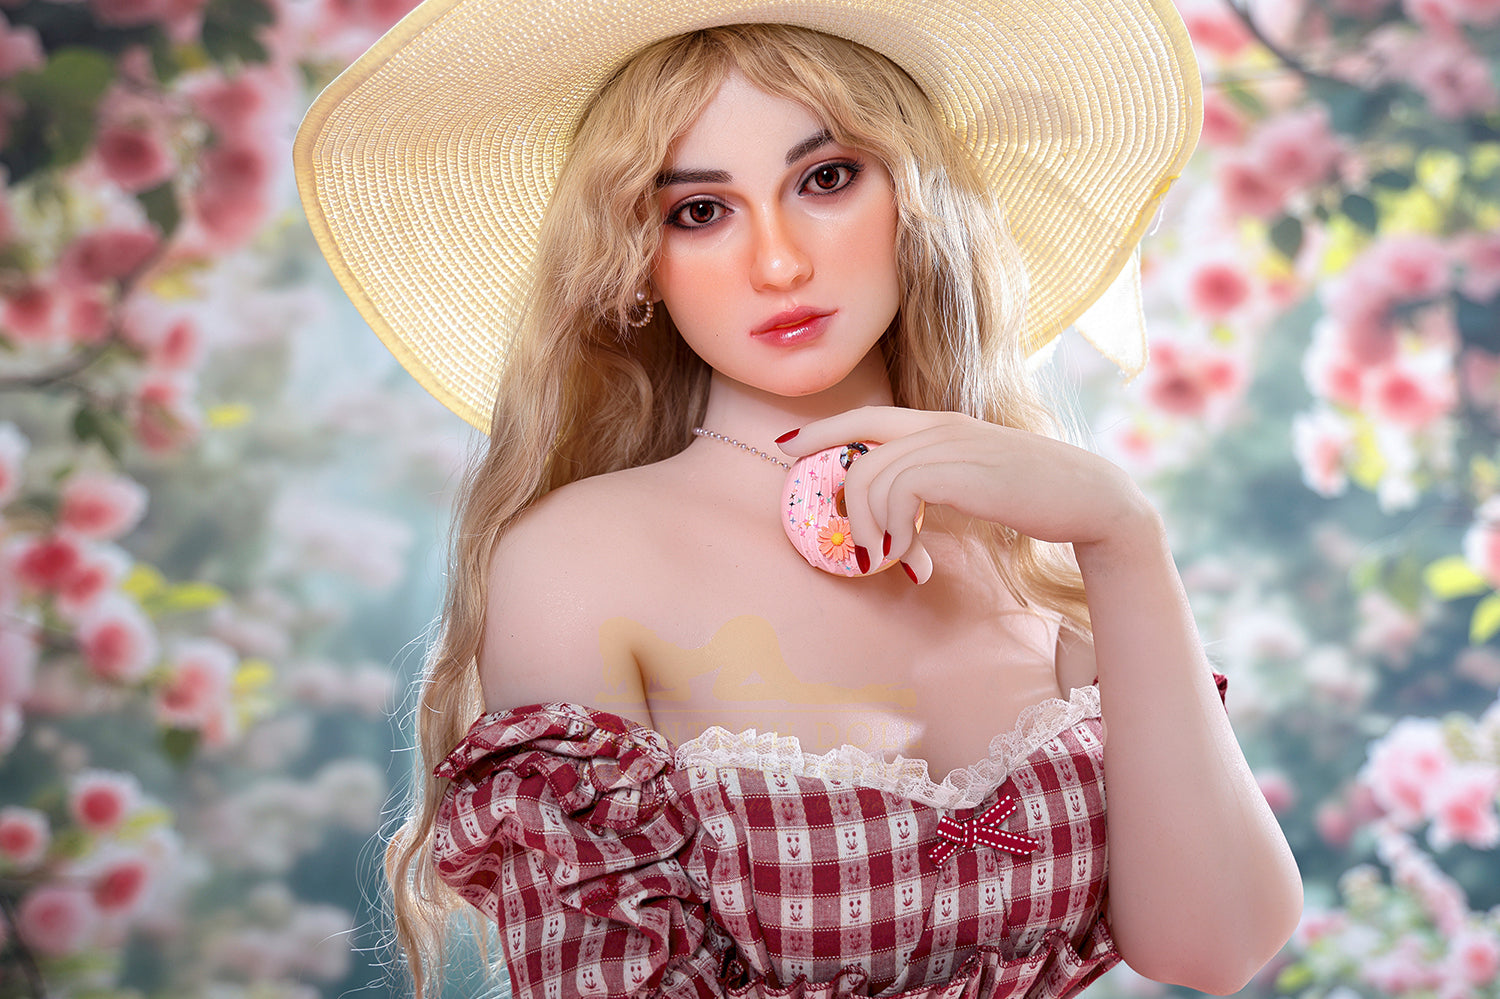 Irontechdoll Aspen 162cm S45 Silicone Head Sex Doll TPE Body White Skin Adult Love Doll